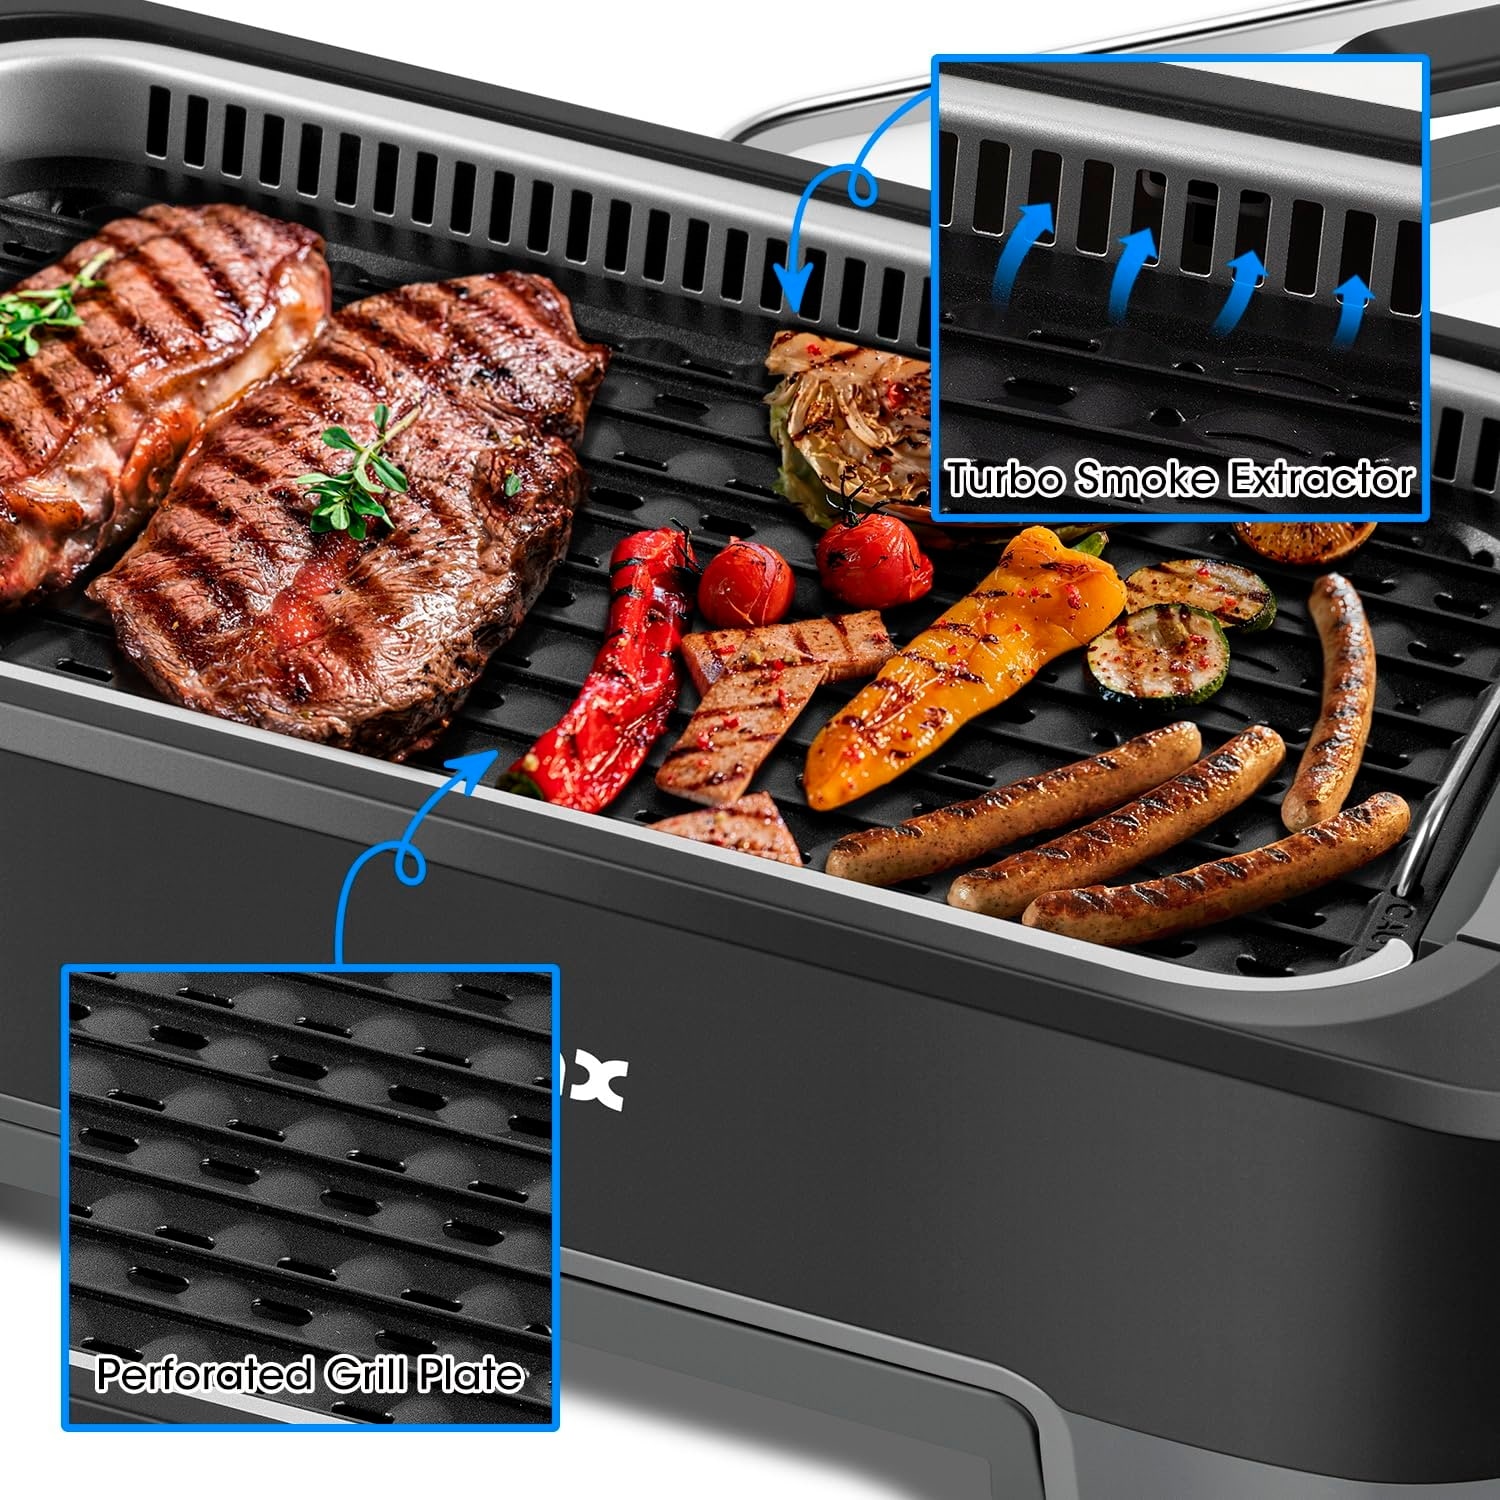 https://ak1.ostkcdn.com/images/products/is/images/direct/c606ba0ebc6b2b1f51d5b5fa279d3c52e6953ad3/Indoor-Grill%2C-1500W-Electric-Grill-Korean-BBQ-Grill-with-LED-Smart-Display-%26-Tempered-Glass-Lid%2C-Non-stick-Removable-Grill-Plate.jpg